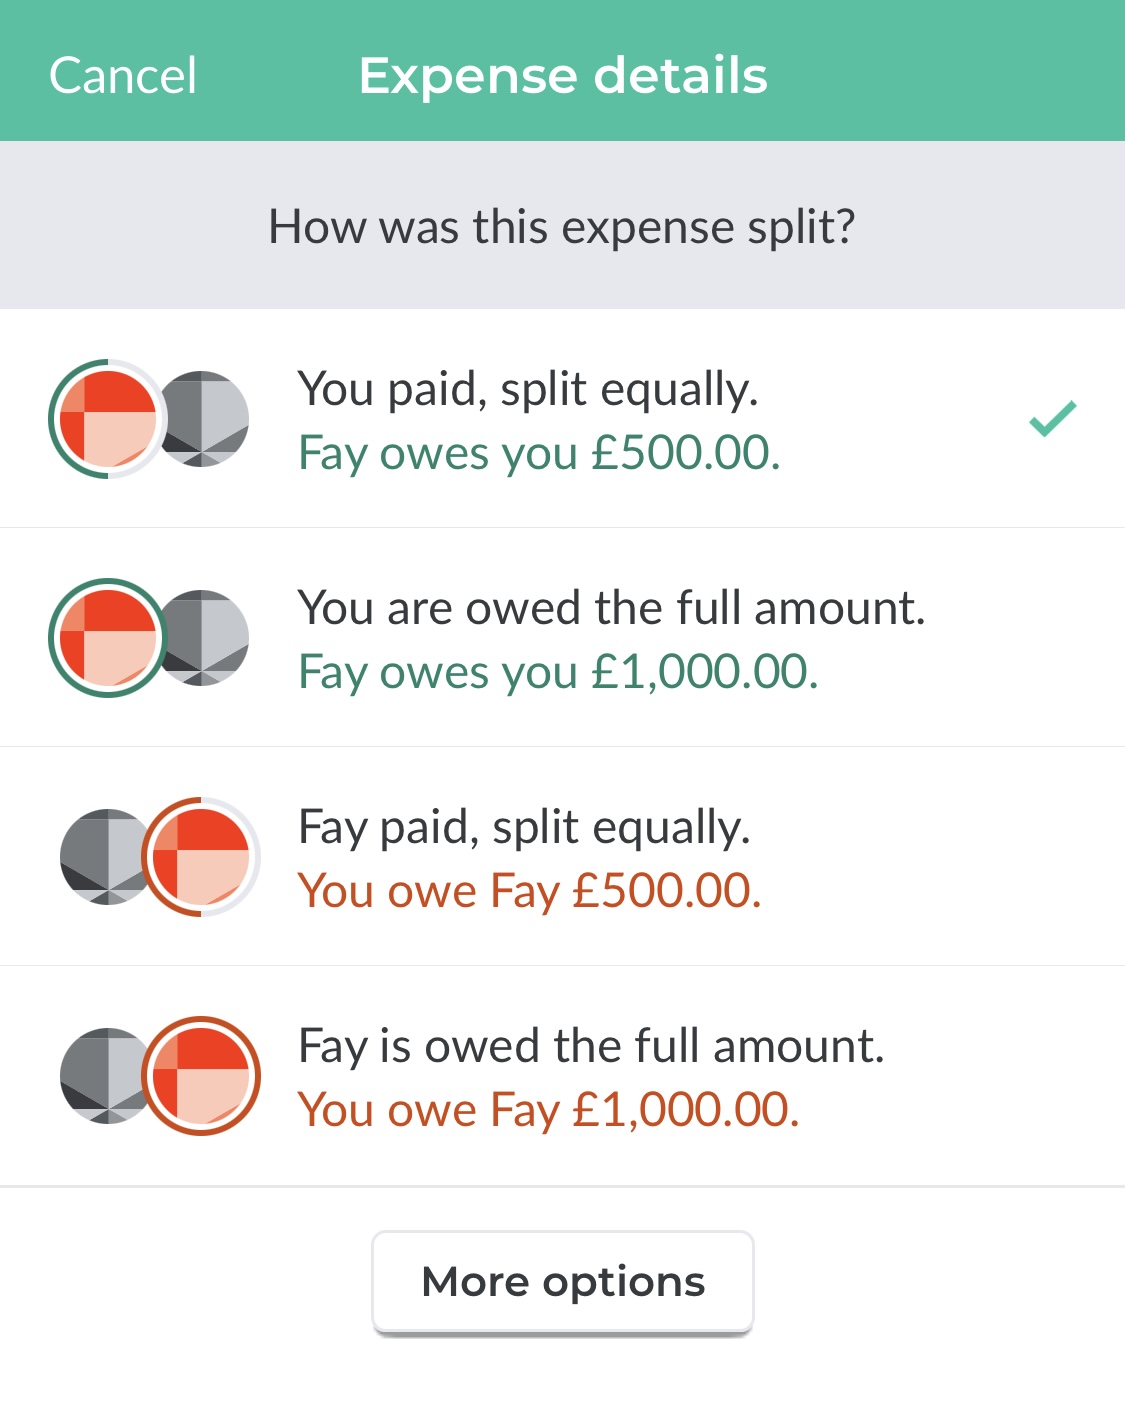 How To Settle Up On Splitwise